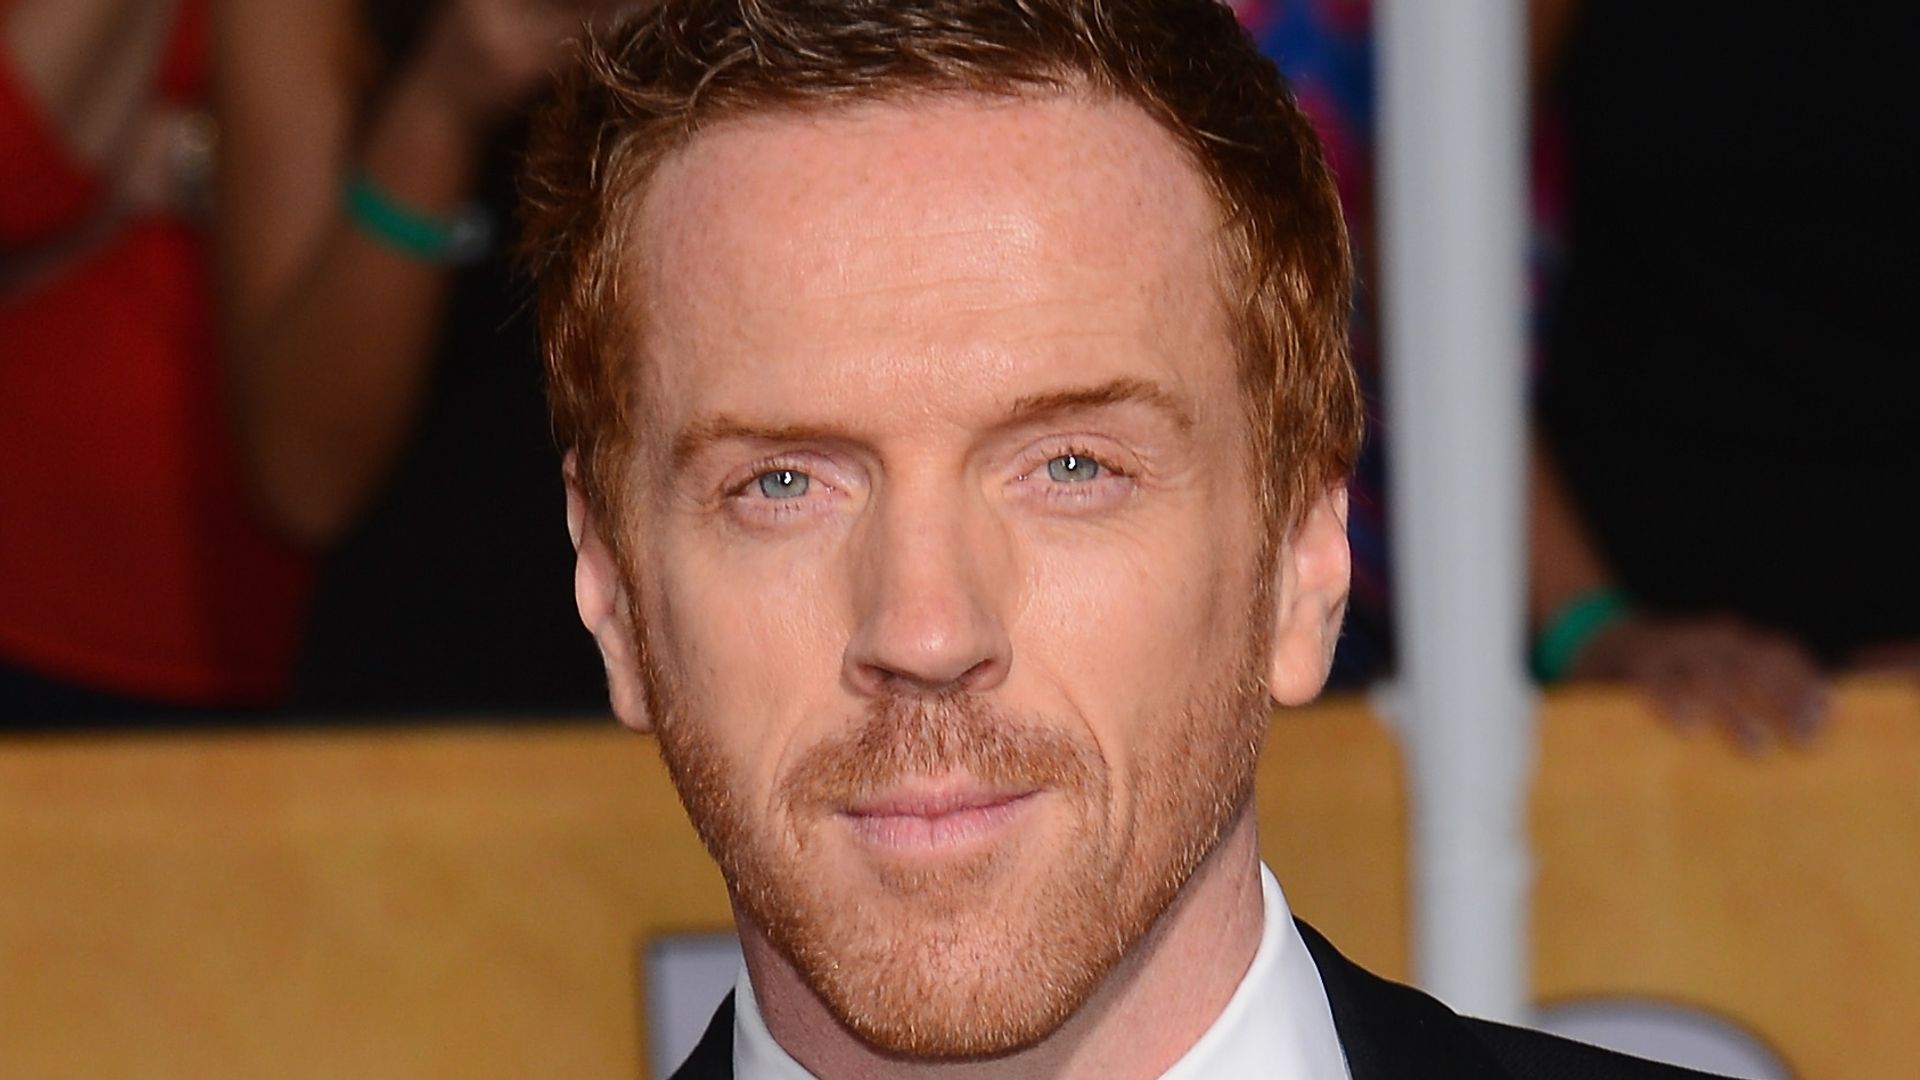 Homeland star Damian Lewis returns to BBC drama in iconic role - see intense first look